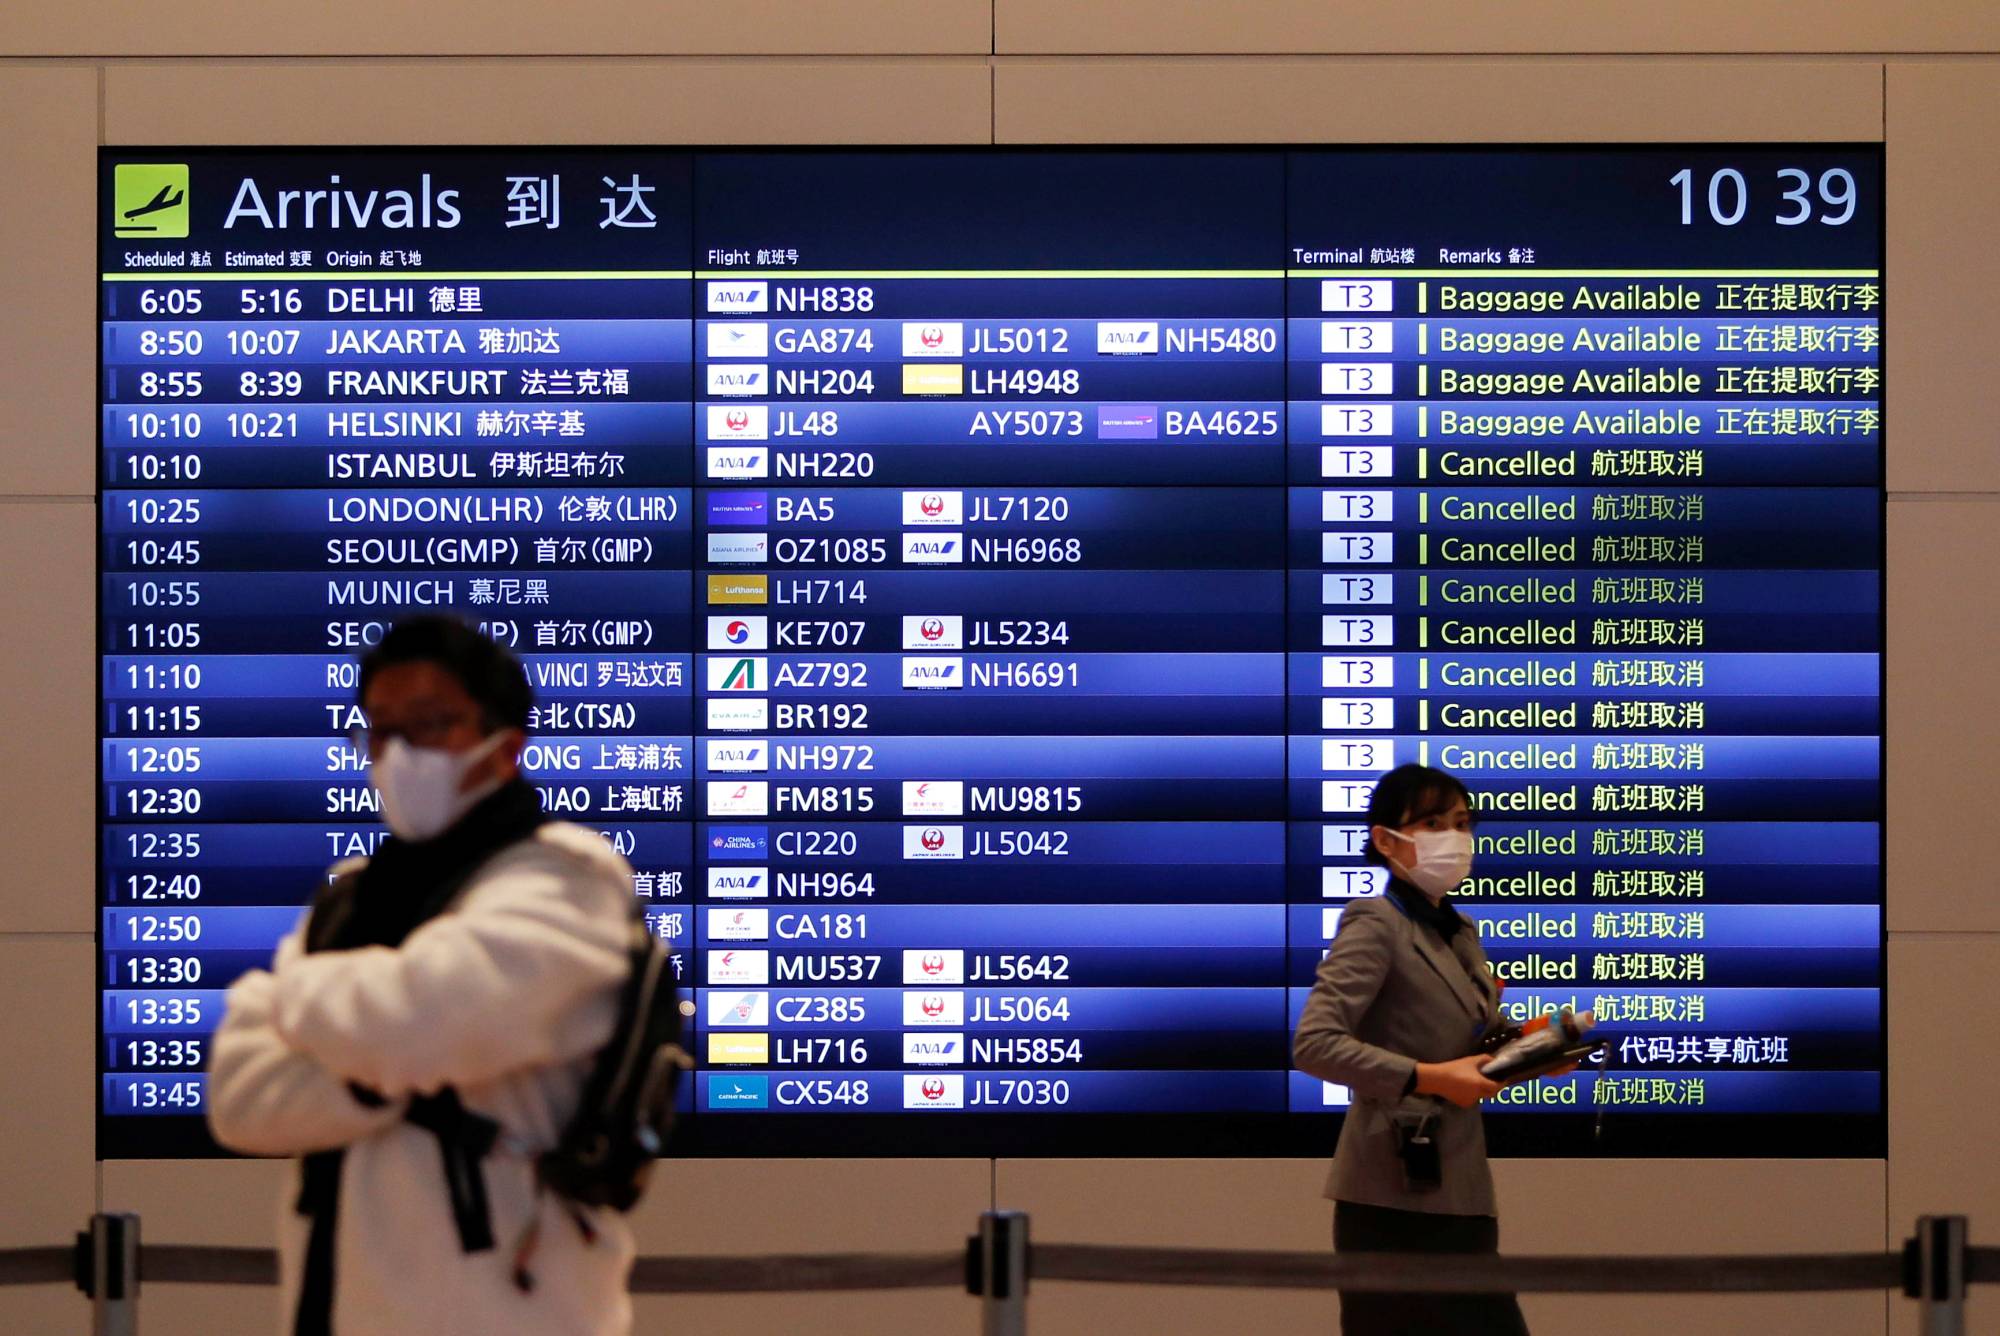 A visitor and an airline company staff member at the arrival gate of the international flight terminal at Haneda Airport in Tokyo amid the coronavirus pandemic on Dec. 28 | REUTERS